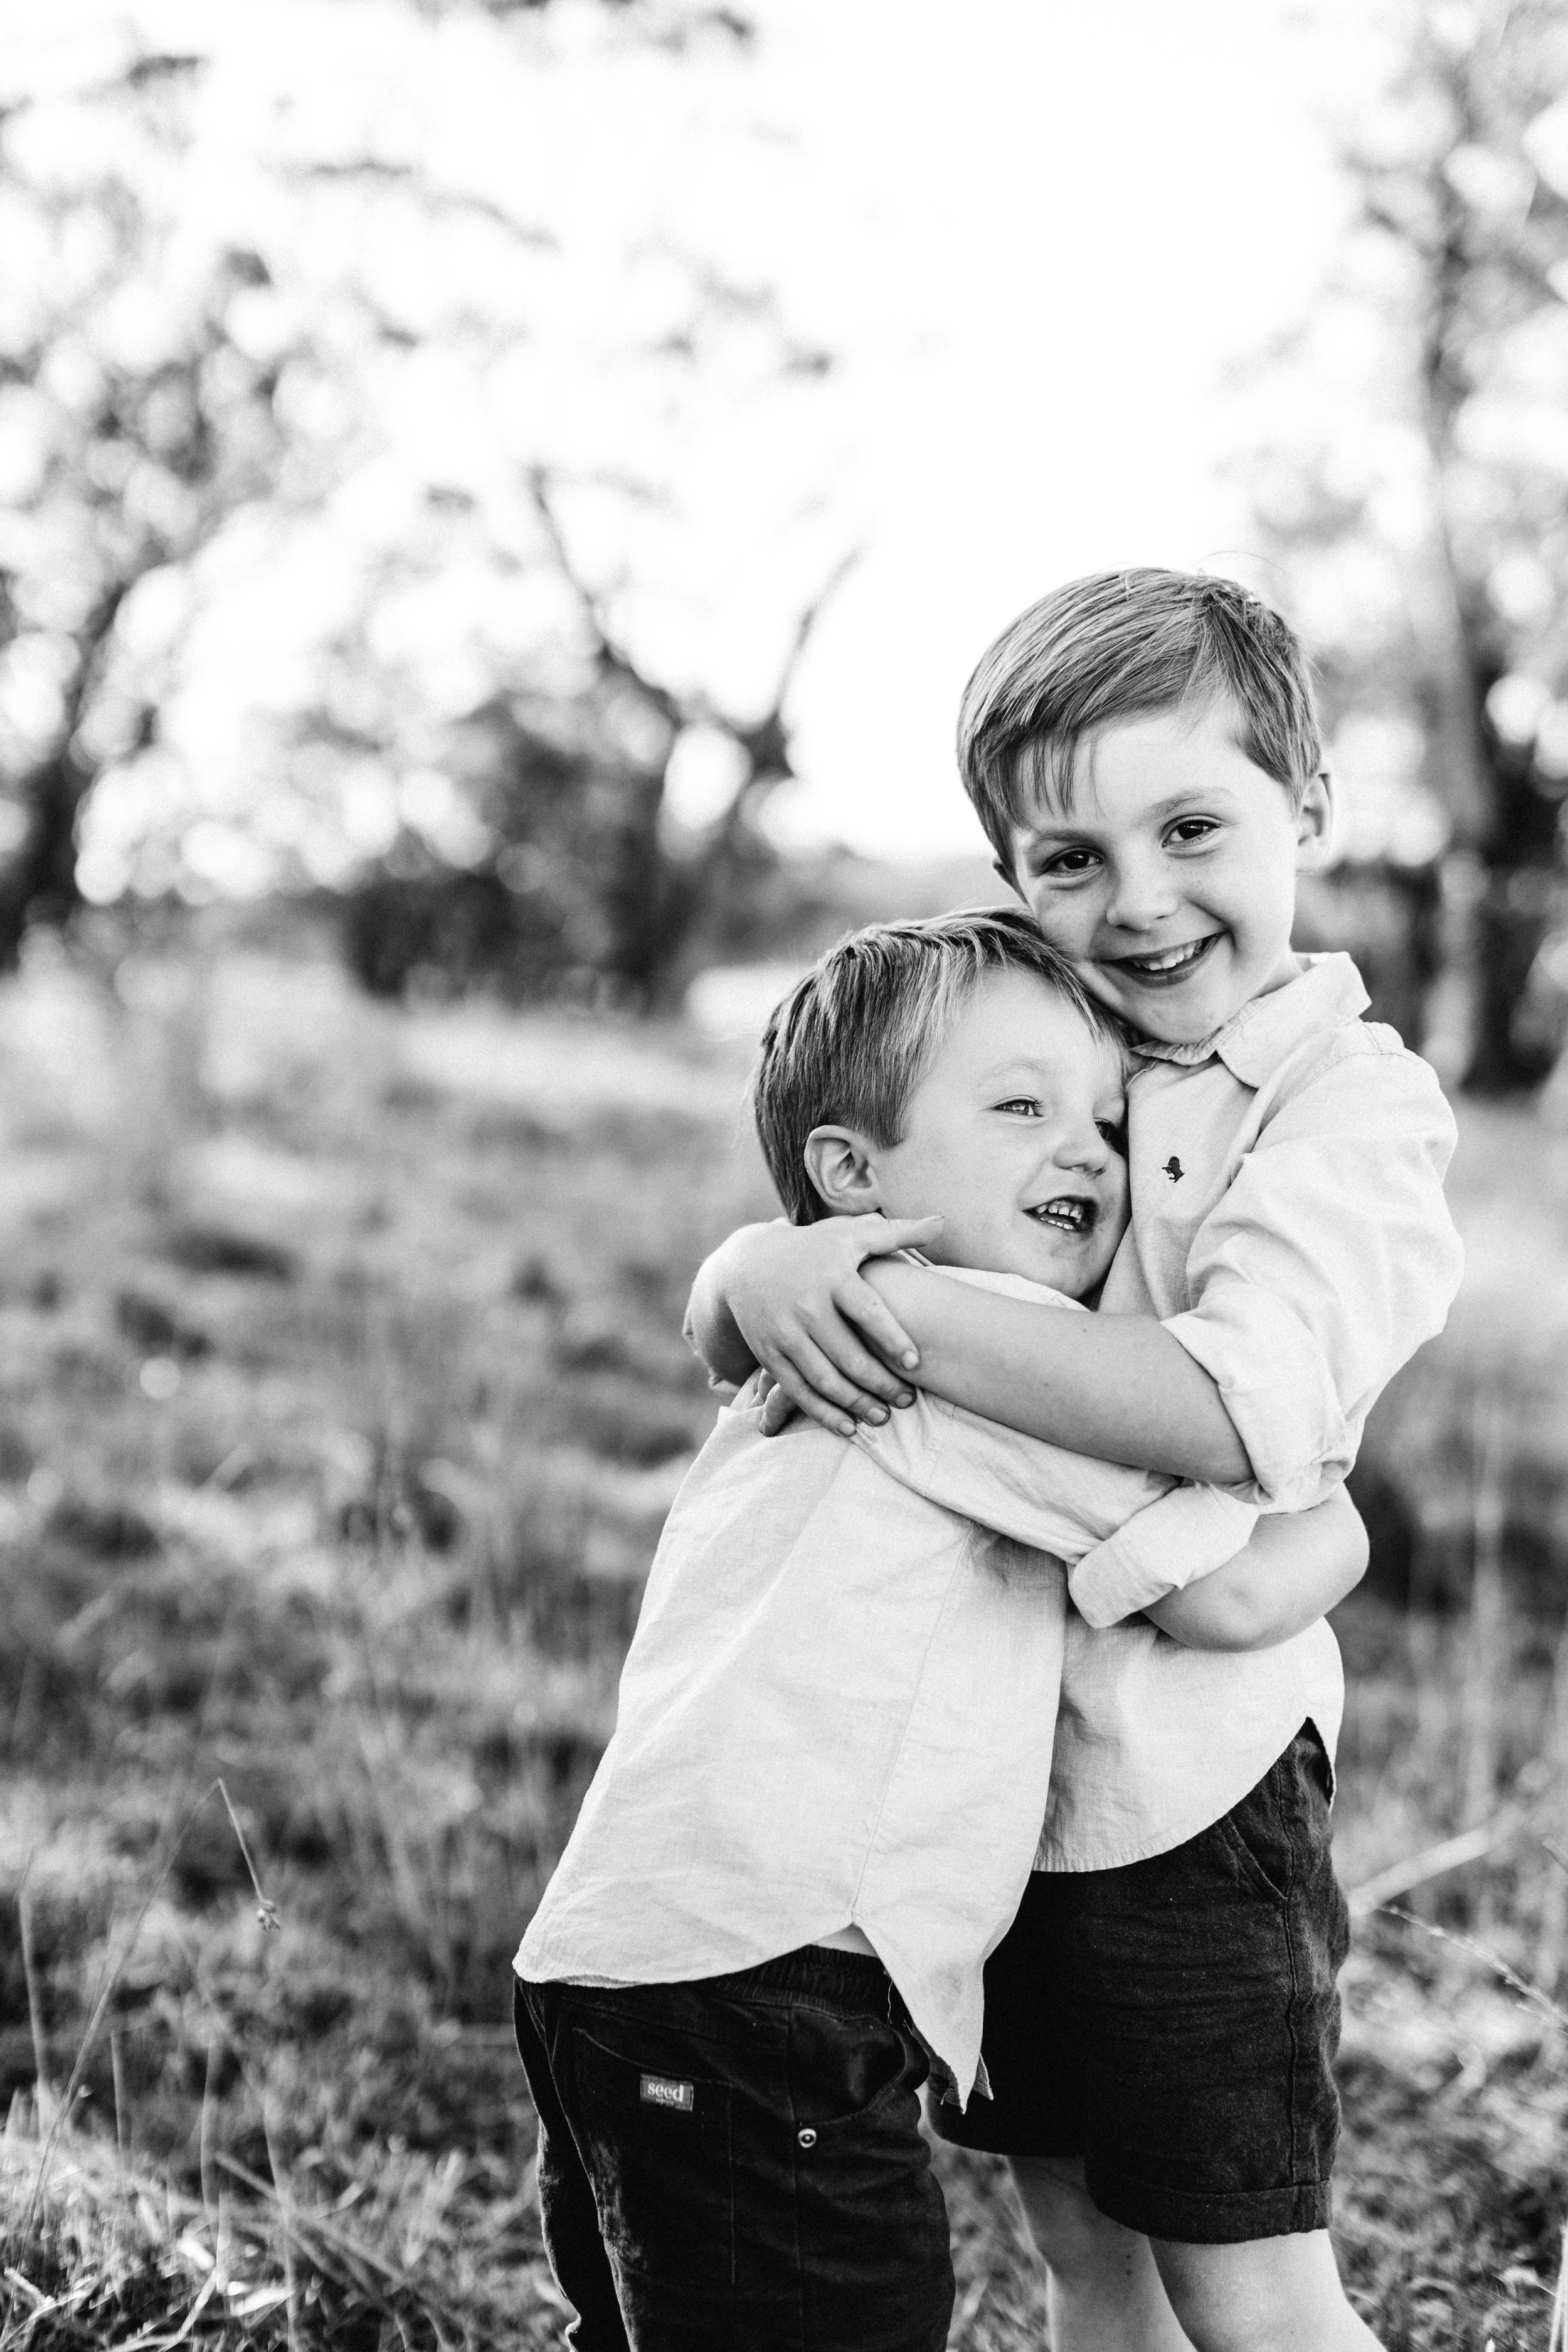 durney-family-exeter-southern-highlands-bowral-inhome-family-lifestyle-wollondilly-camden-macarthur-sydney-photography-www.emilyobrienphotography.net-47.jpg